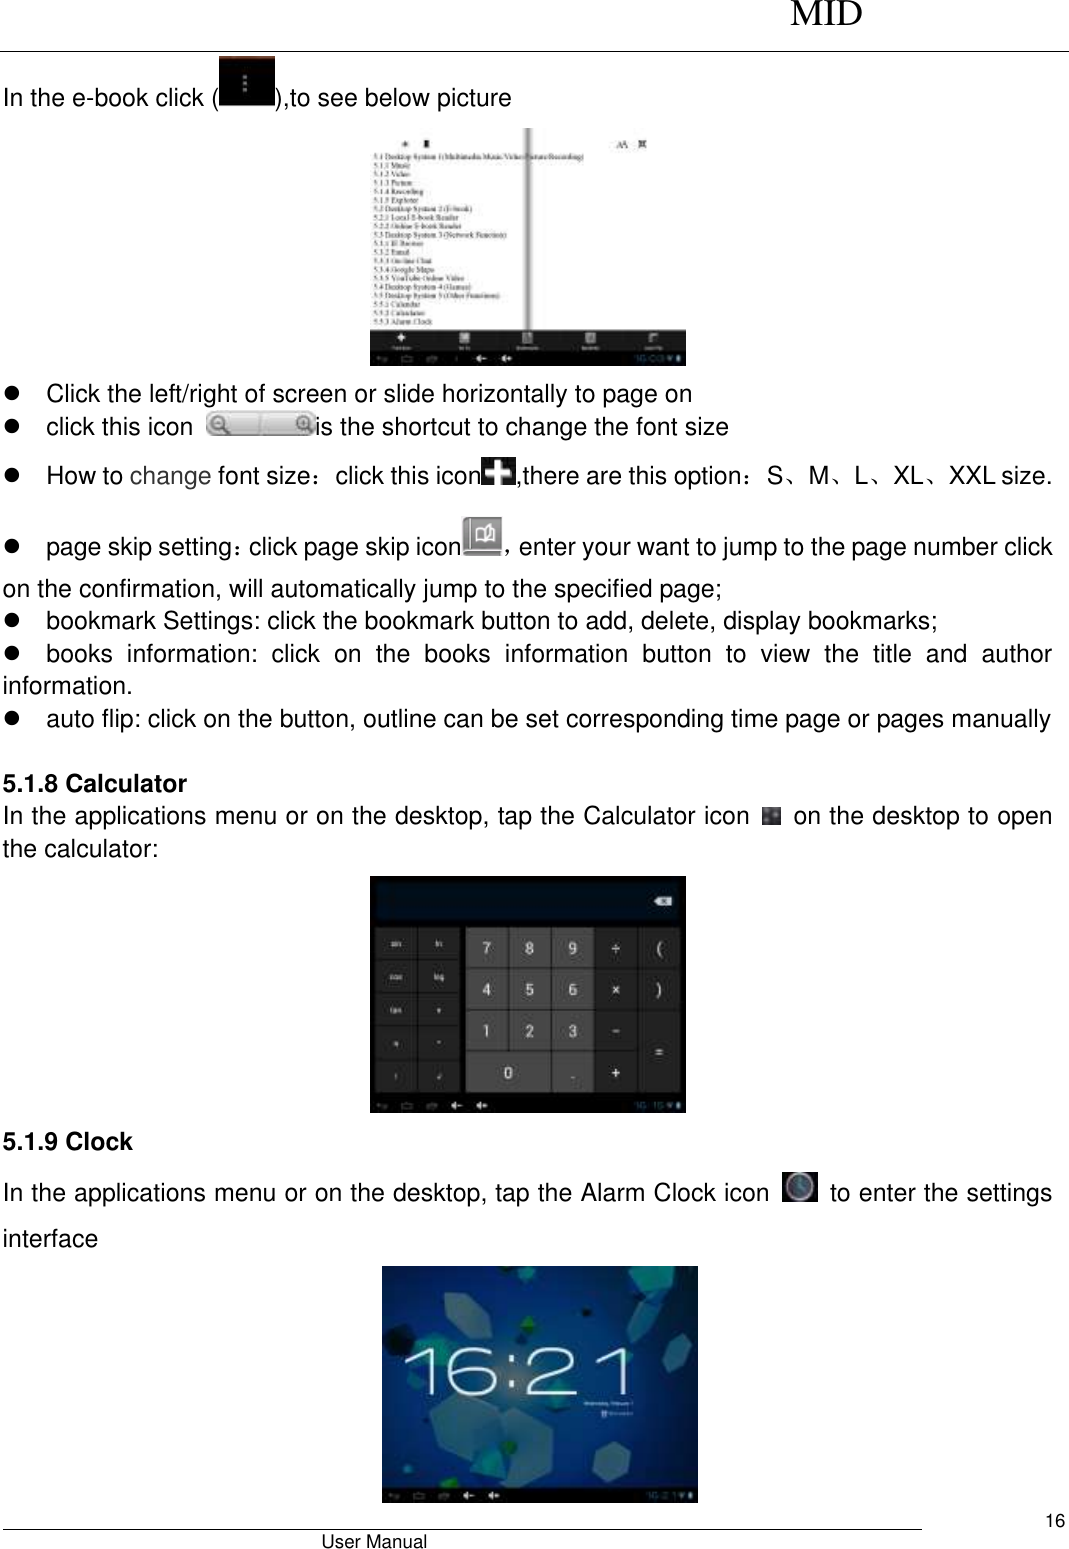      MID                                        User Manual     16 In the e-book click ( ),to see below picture    Click the left/right of screen or slide horizontally to page on   click this icon  is the shortcut to change the font size     How to change font size：click this icon ,there are this option：S、M、L、XL、XXL size.   page skip setting：click page skip icon ，enter your want to jump to the page number click on the confirmation, will automatically jump to the specified page;   bookmark Settings: click the bookmark button to add, delete, display bookmarks;   books  information:  click  on  the  books  information  button  to  view  the  title  and  author information.   auto flip: click on the button, outline can be set corresponding time page or pages manually  5.1.8 Calculator In the applications menu or on the desktop, tap the Calculator icon    on the desktop to open the calculator:    5.1.9 Clock In the applications menu or on the desktop, tap the Alarm Clock icon    to enter the settings interface  